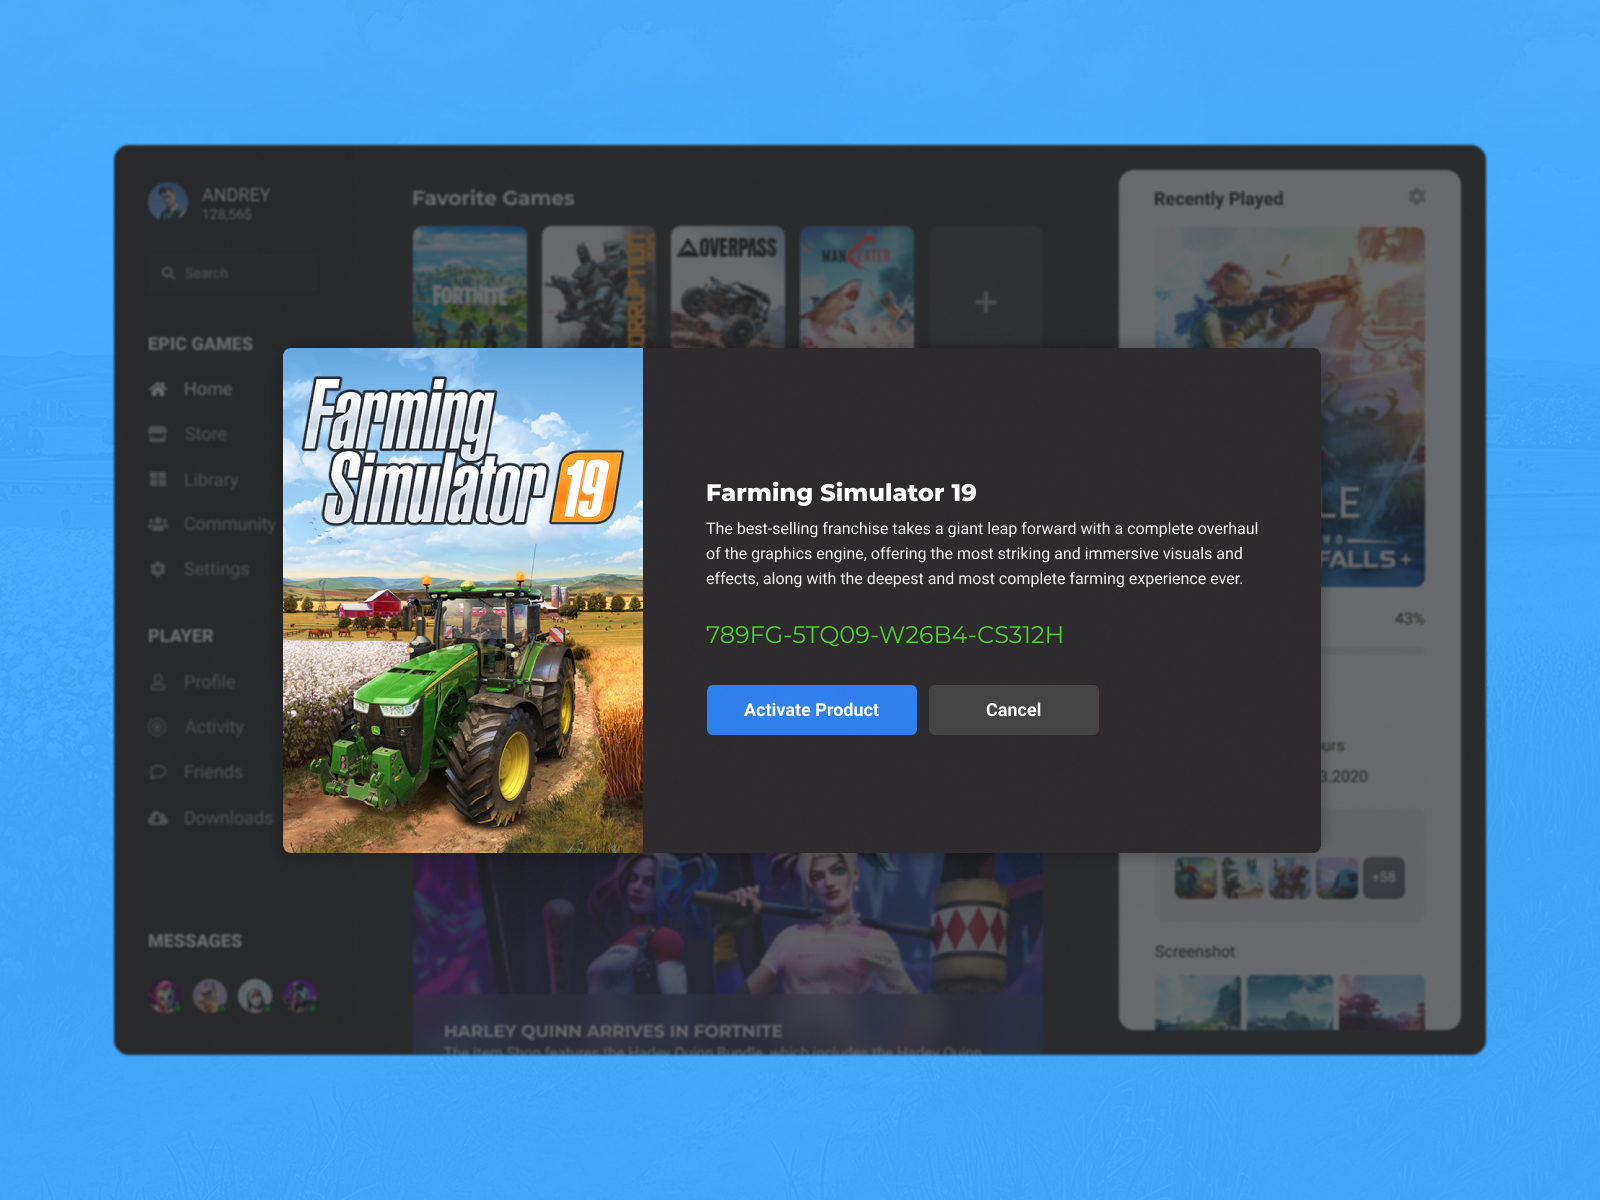 Concept Epic Games  Activation Games #16 by Andrey Artamonov on Dribbble